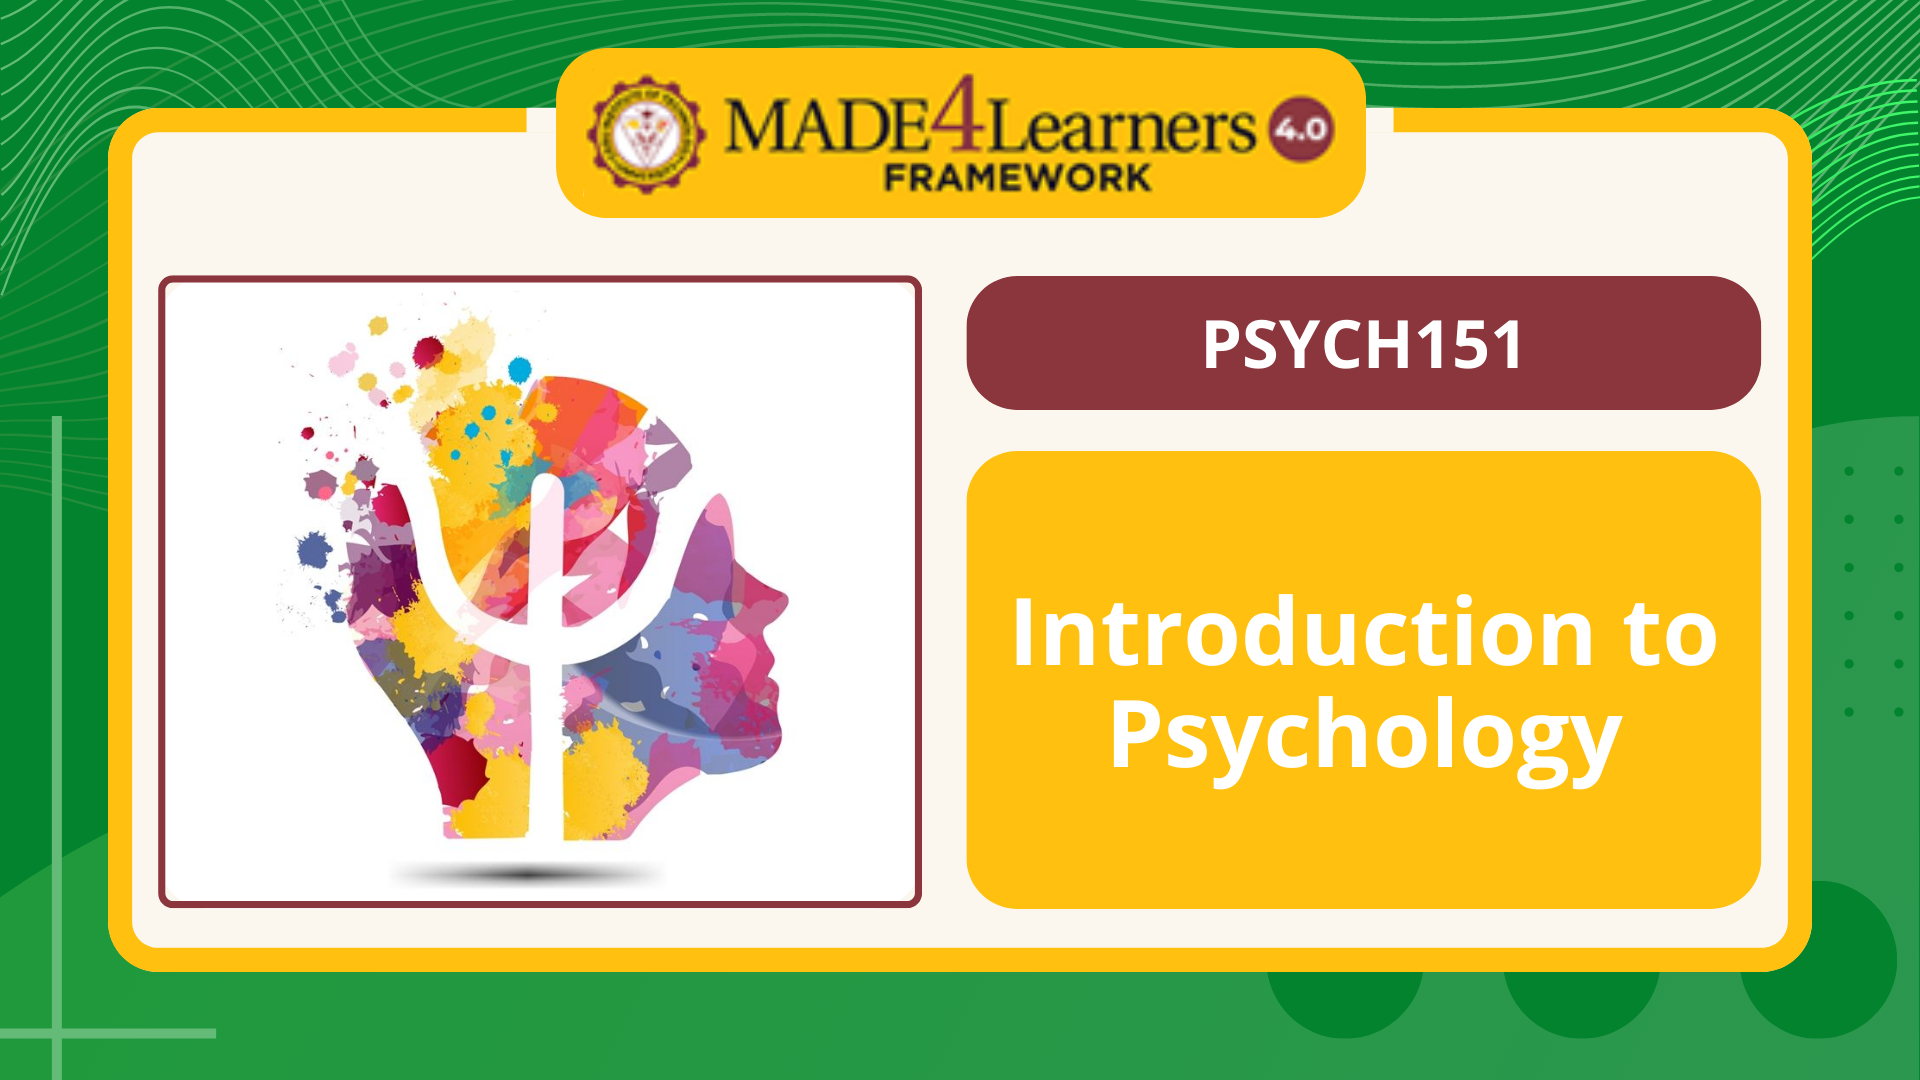 PSYCH151 Introduction to Psychology (E5-C2 AP3)